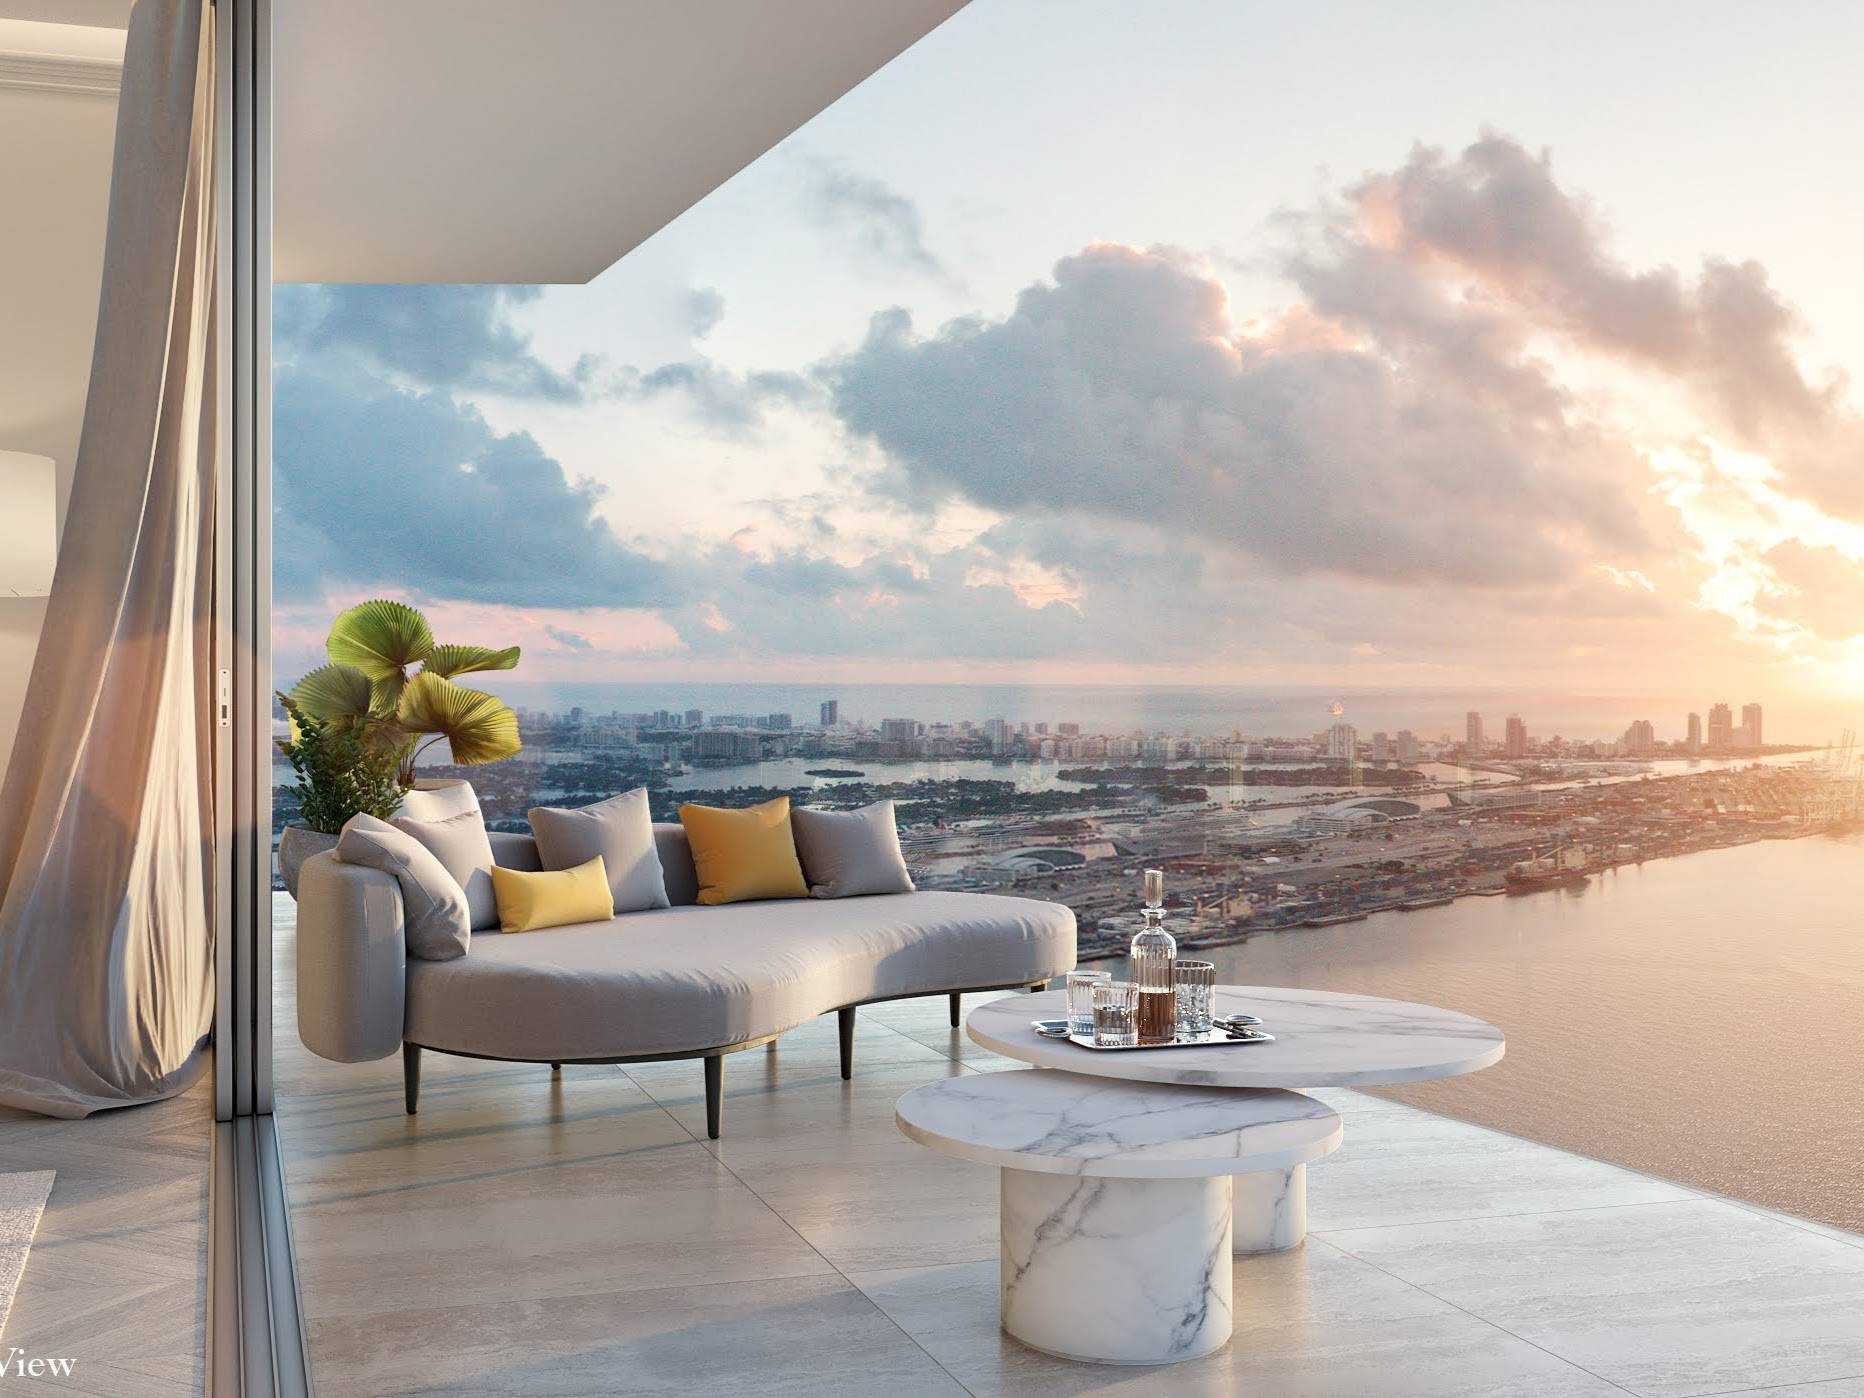 Baccarat Boutique Turnkey Brickell Residences 1Bedroom Plus Den w/2Bath - Miami River Views In The Heart of Brickell